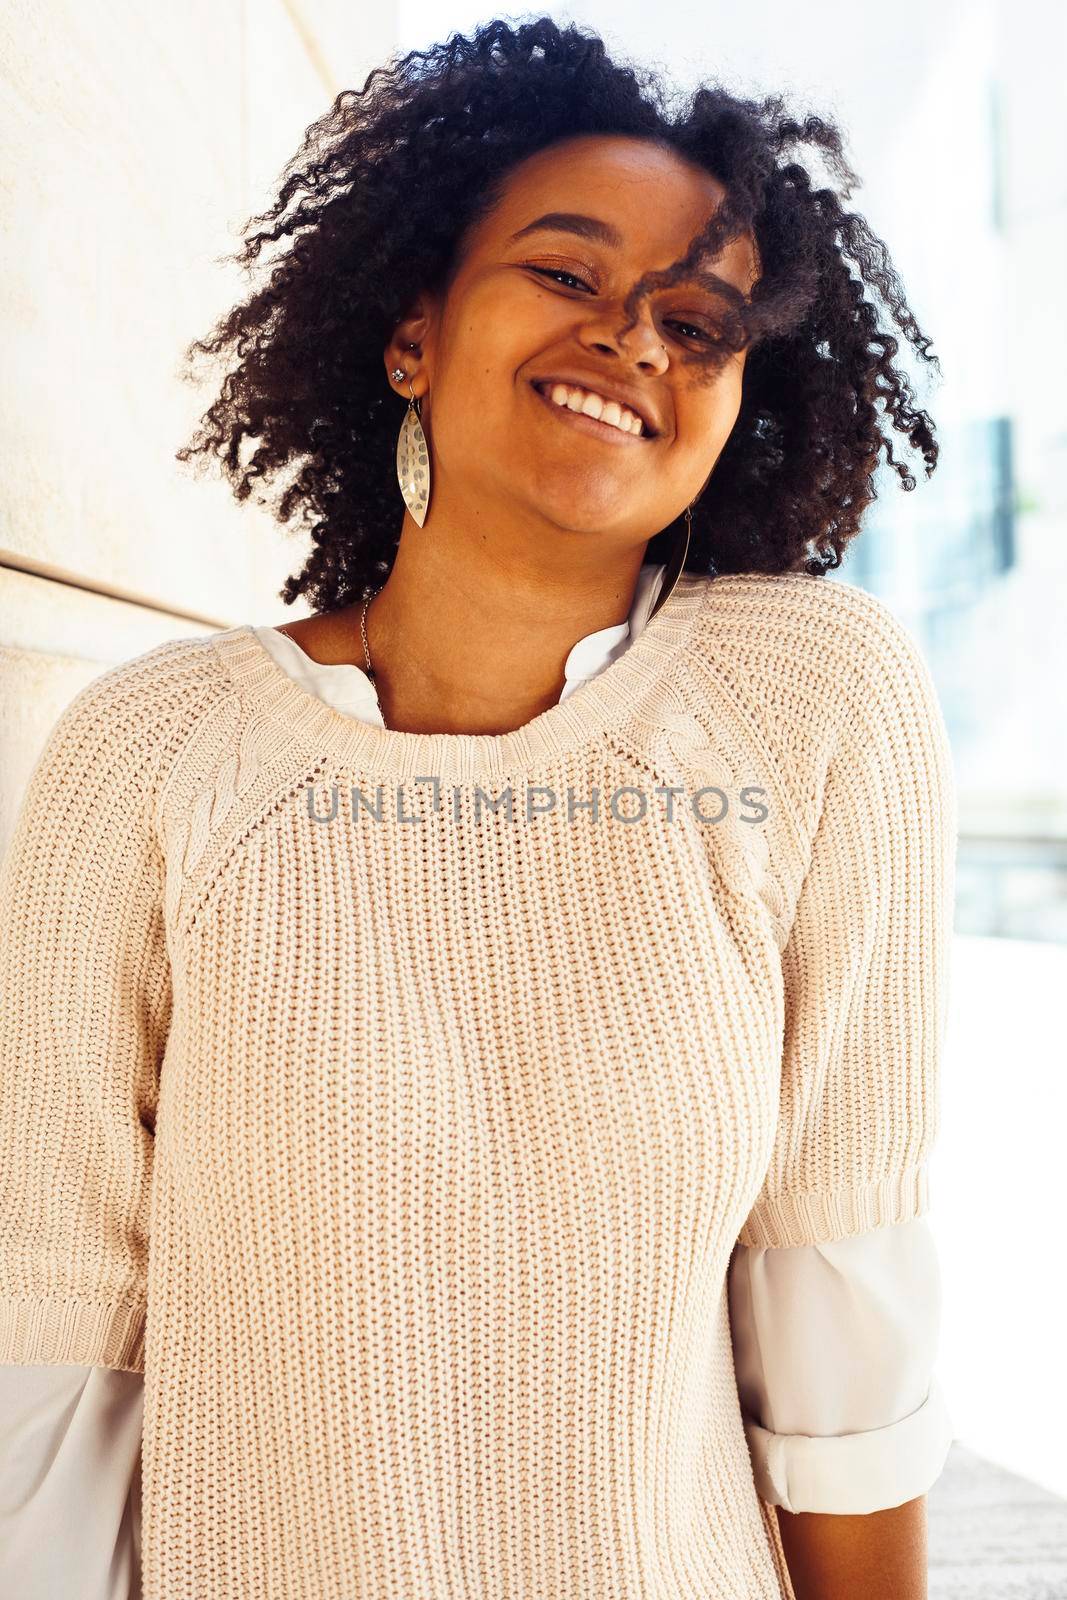 young pretty african girl posing cheerful on city background, lifestyle outdoor people concept close up